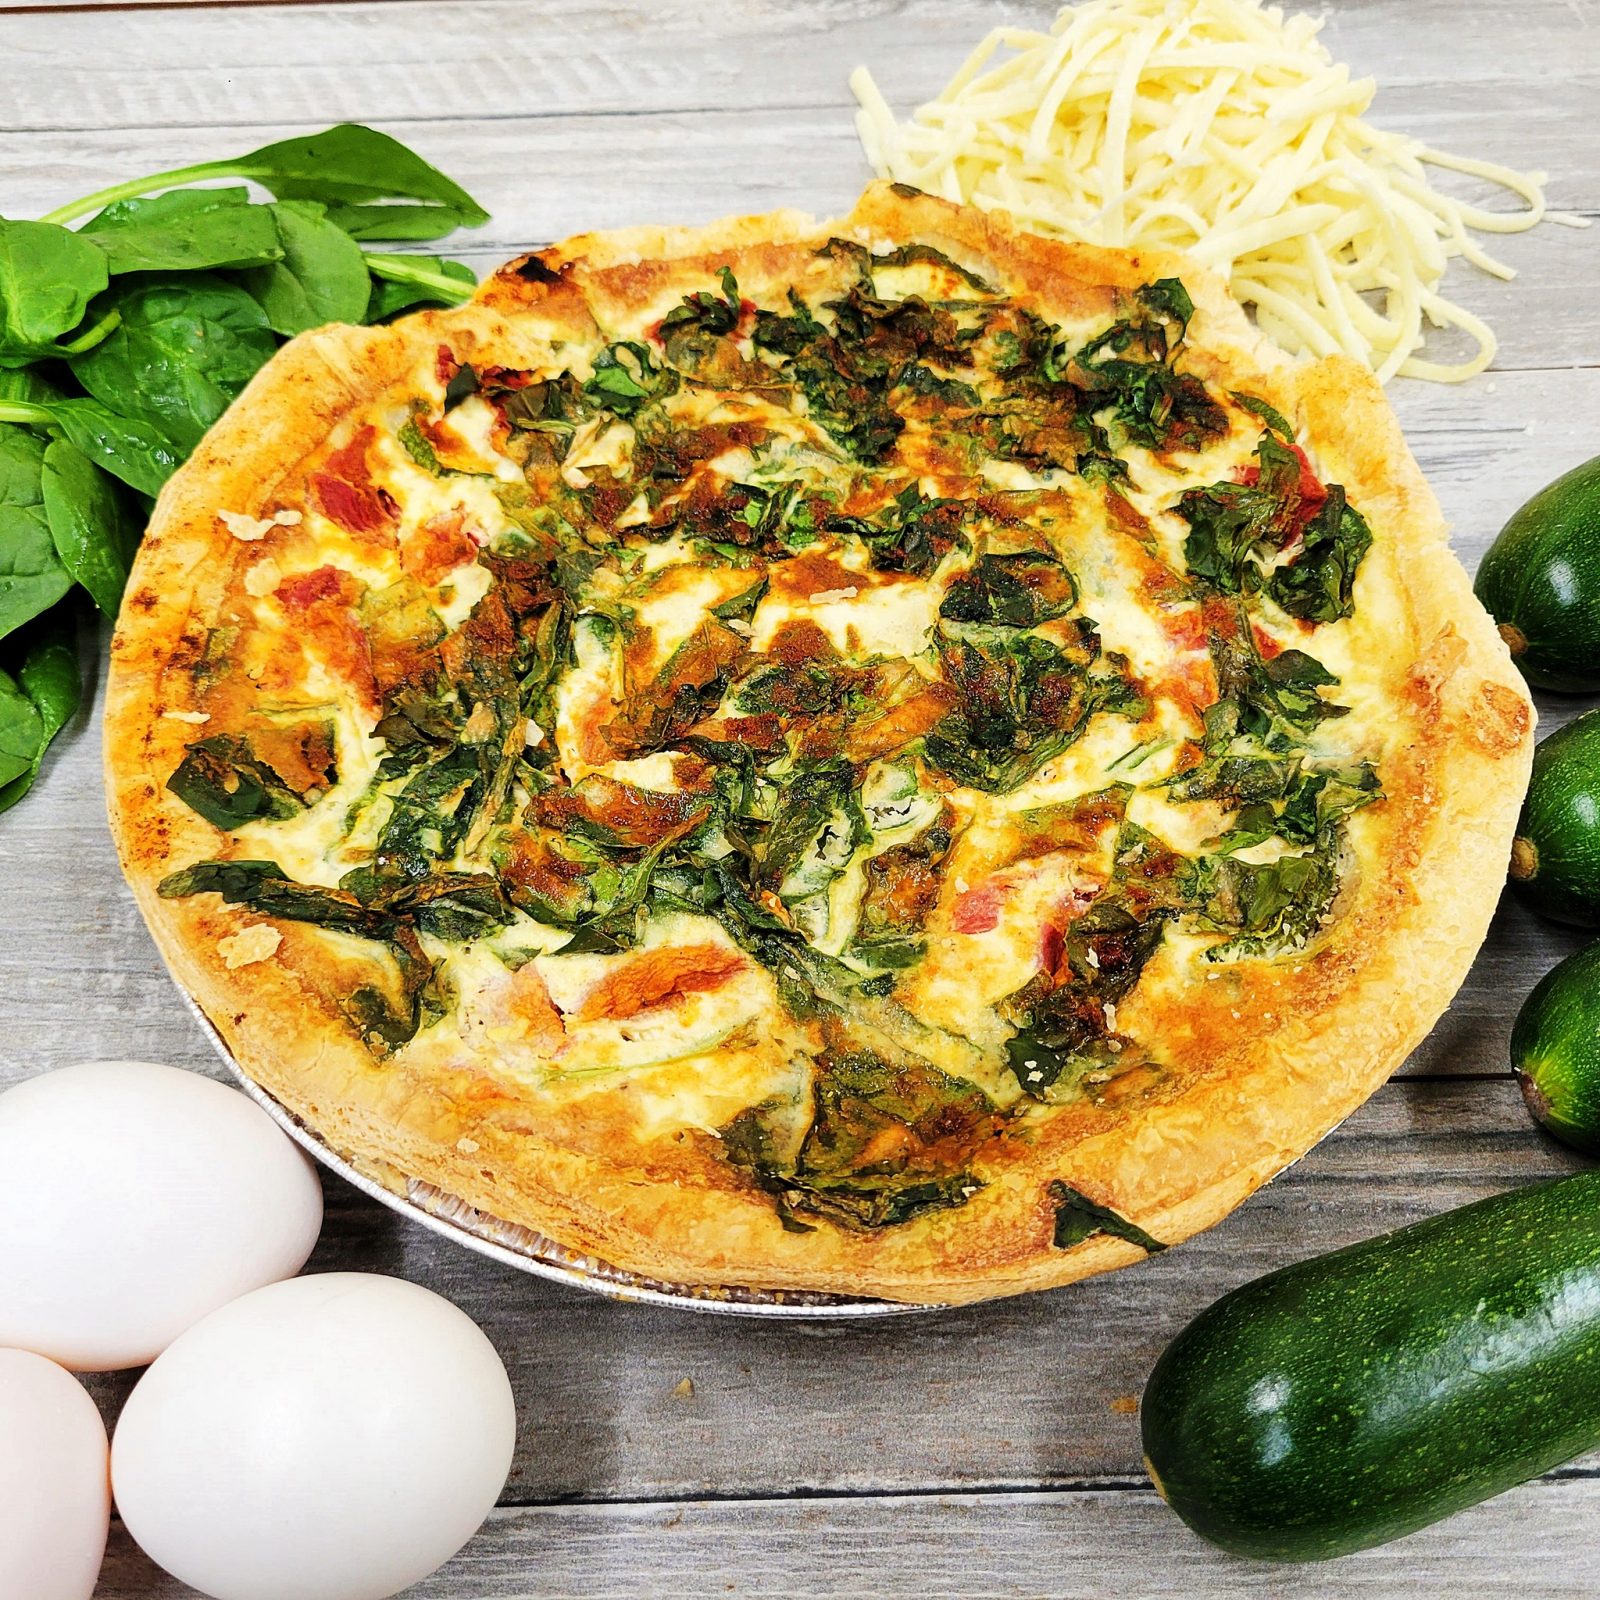 A pizza is sitting on a table next to eggs and vegetables.